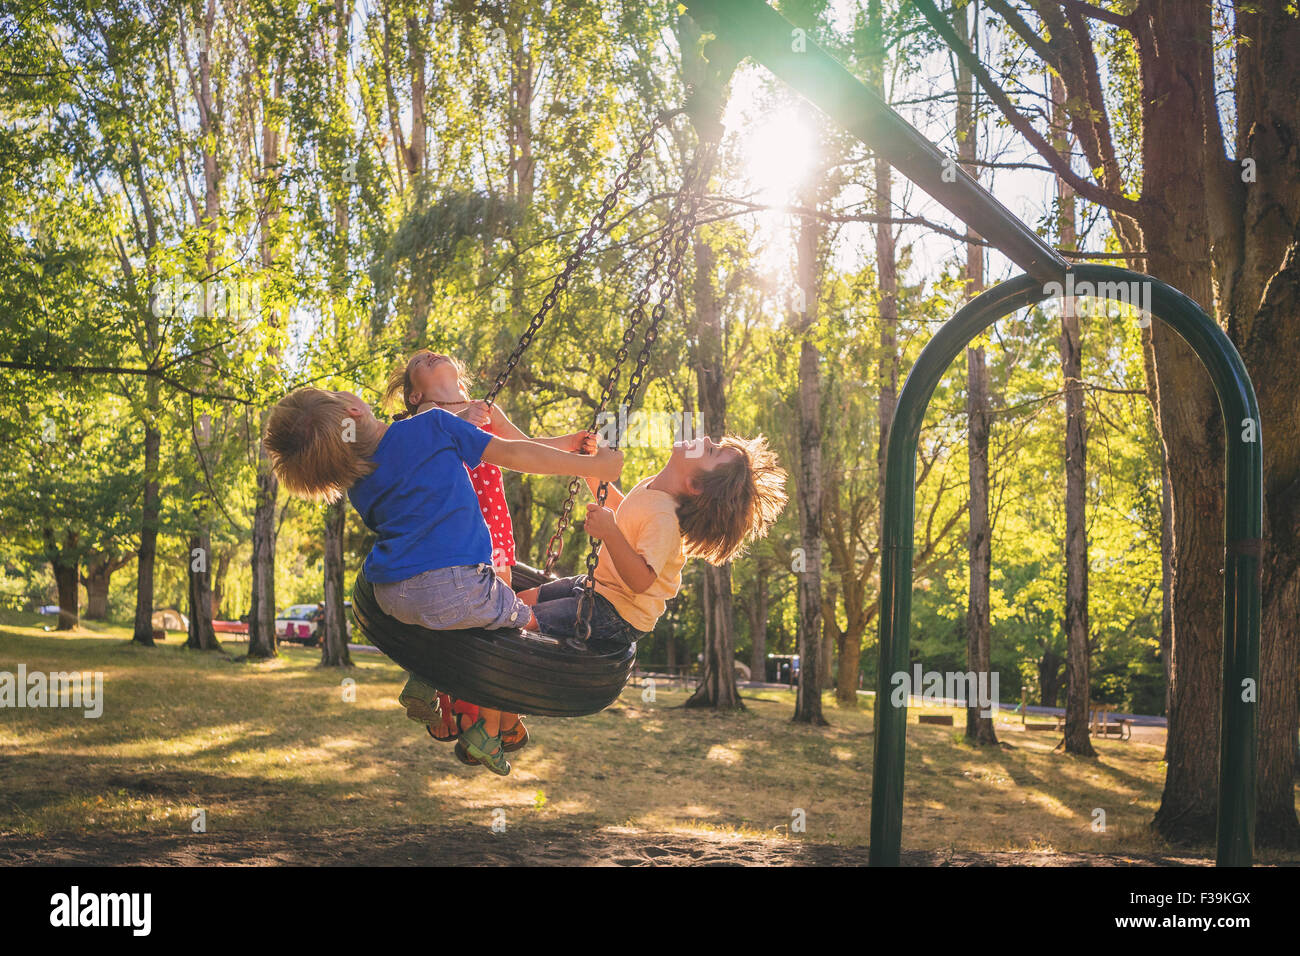 Three children playing on a swing Stock Photo